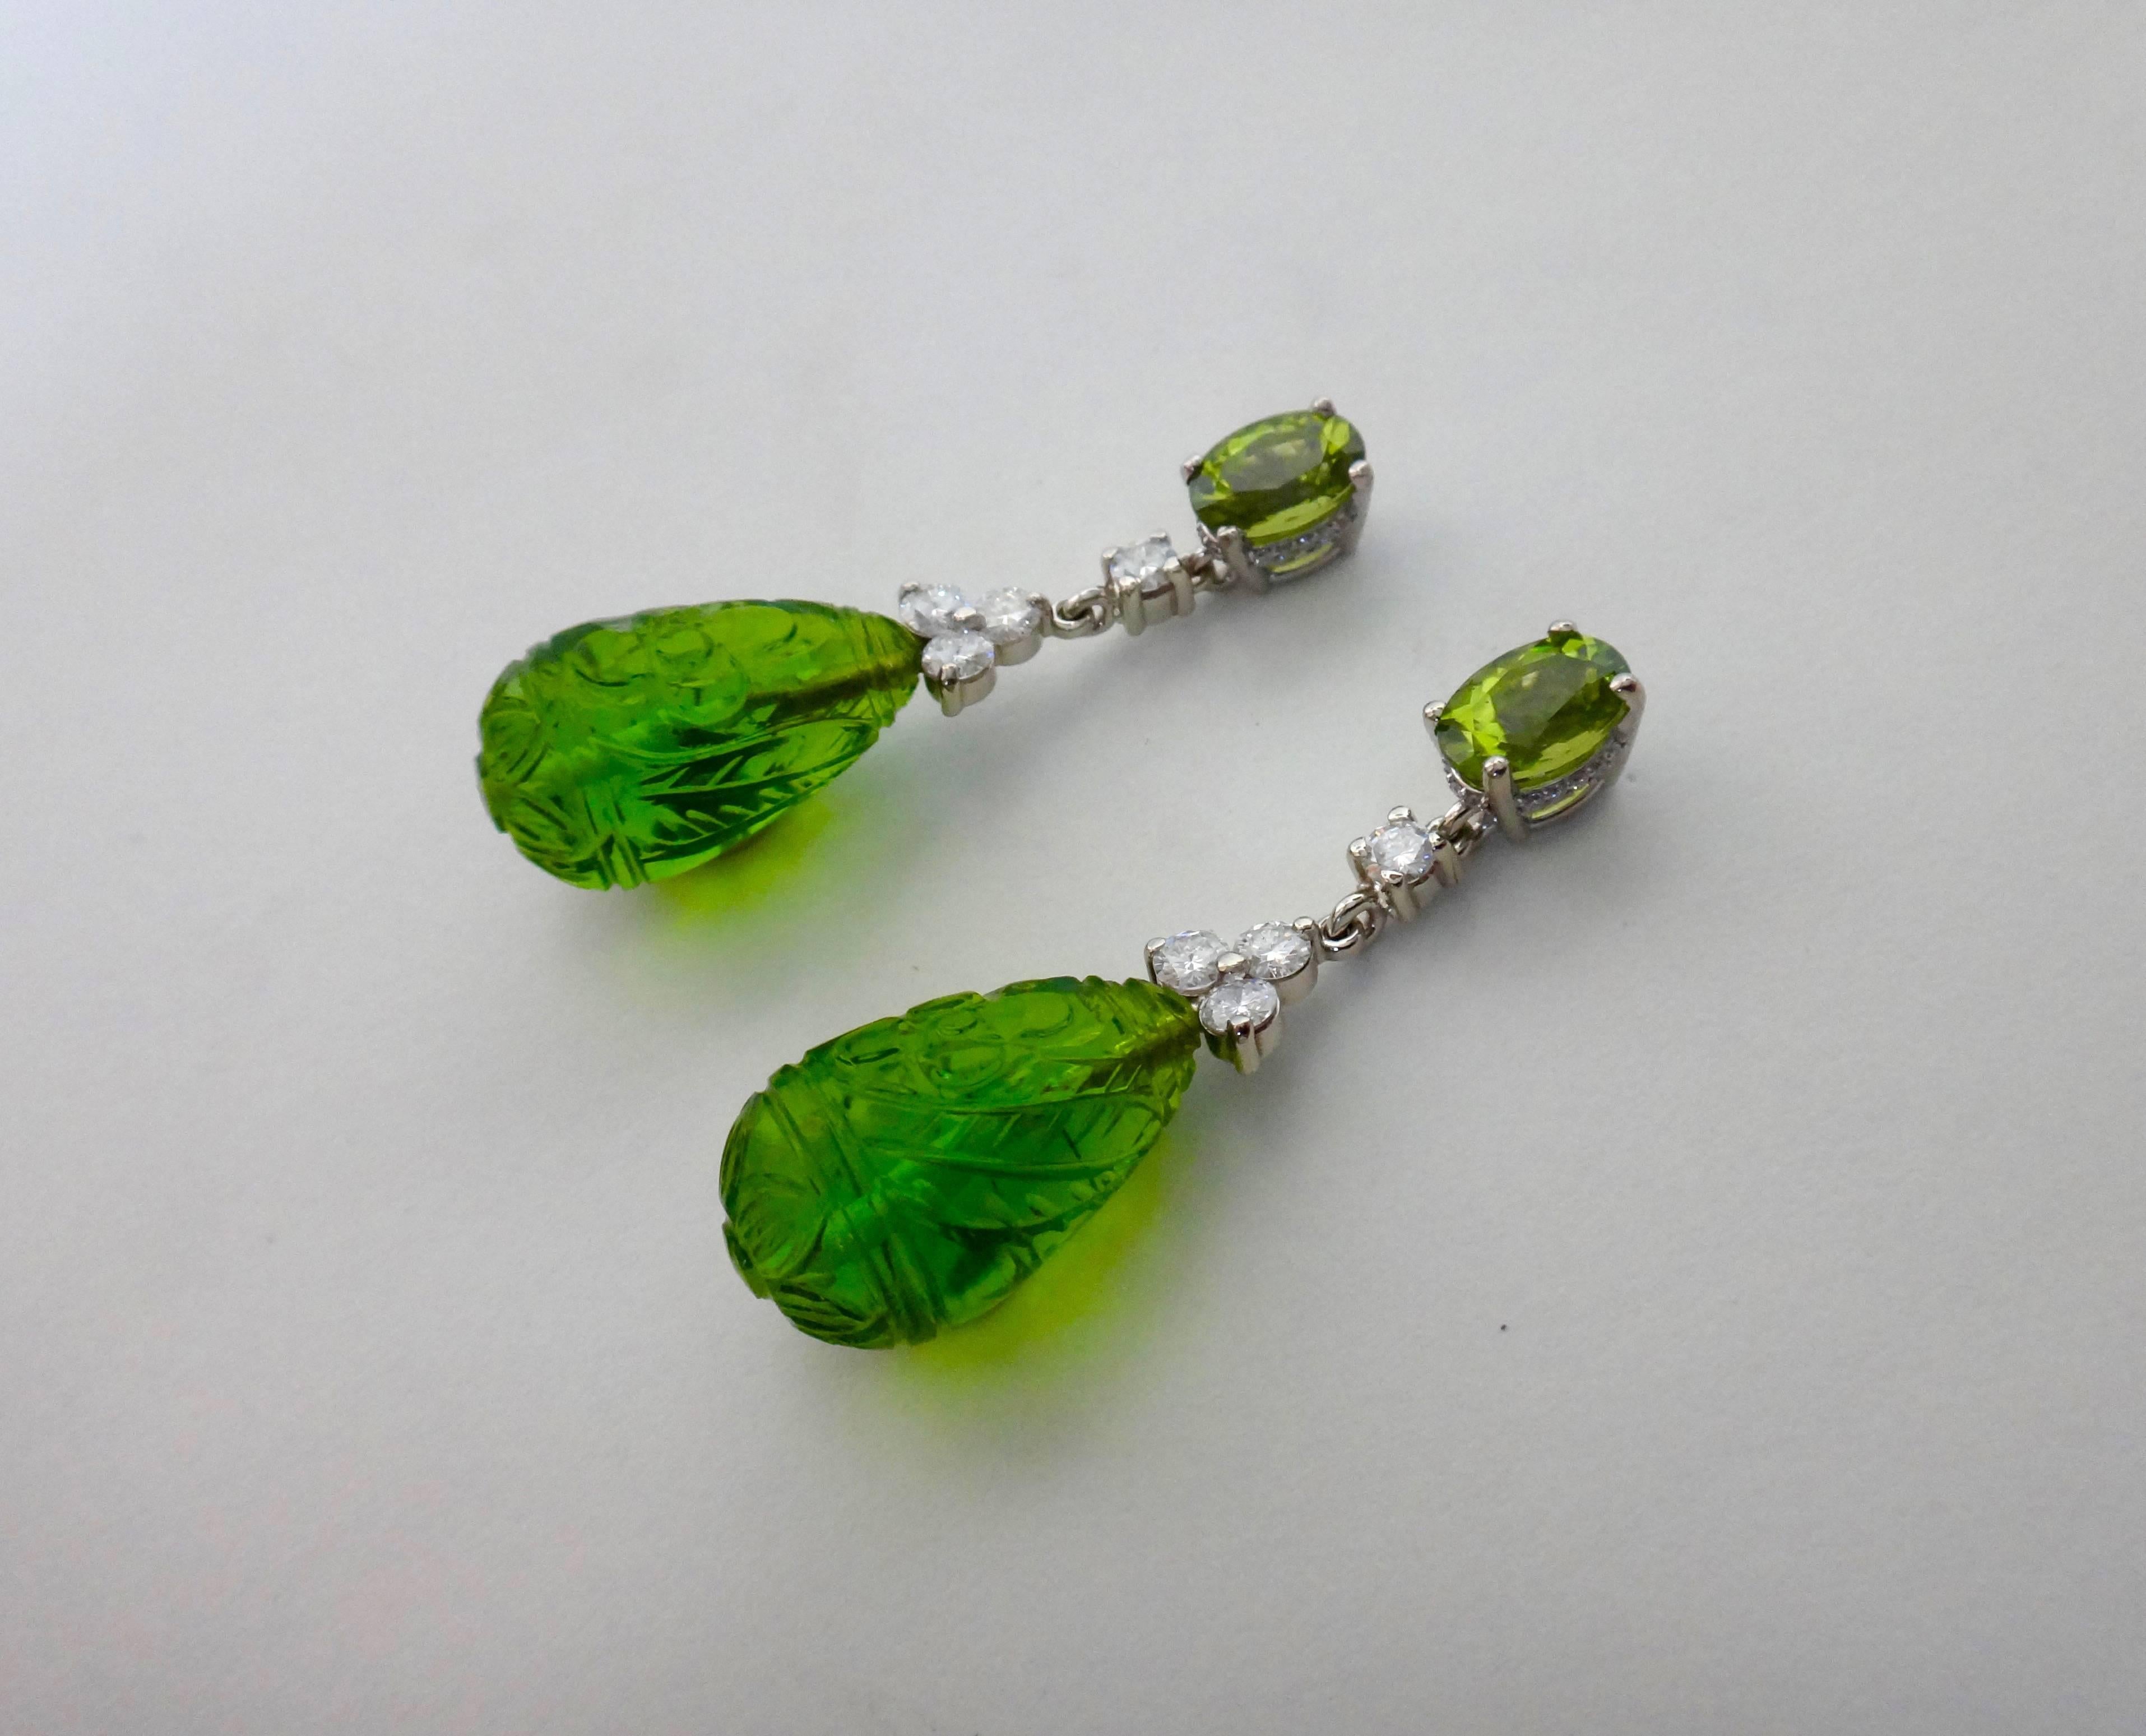 Oval cut peridots support dangles of white diamonds and carved green fluorite drops from India.  The scintillating green gems are set in white gold mountings with micro-pave detail around the bearings of the peridots.  The earrings come with posts